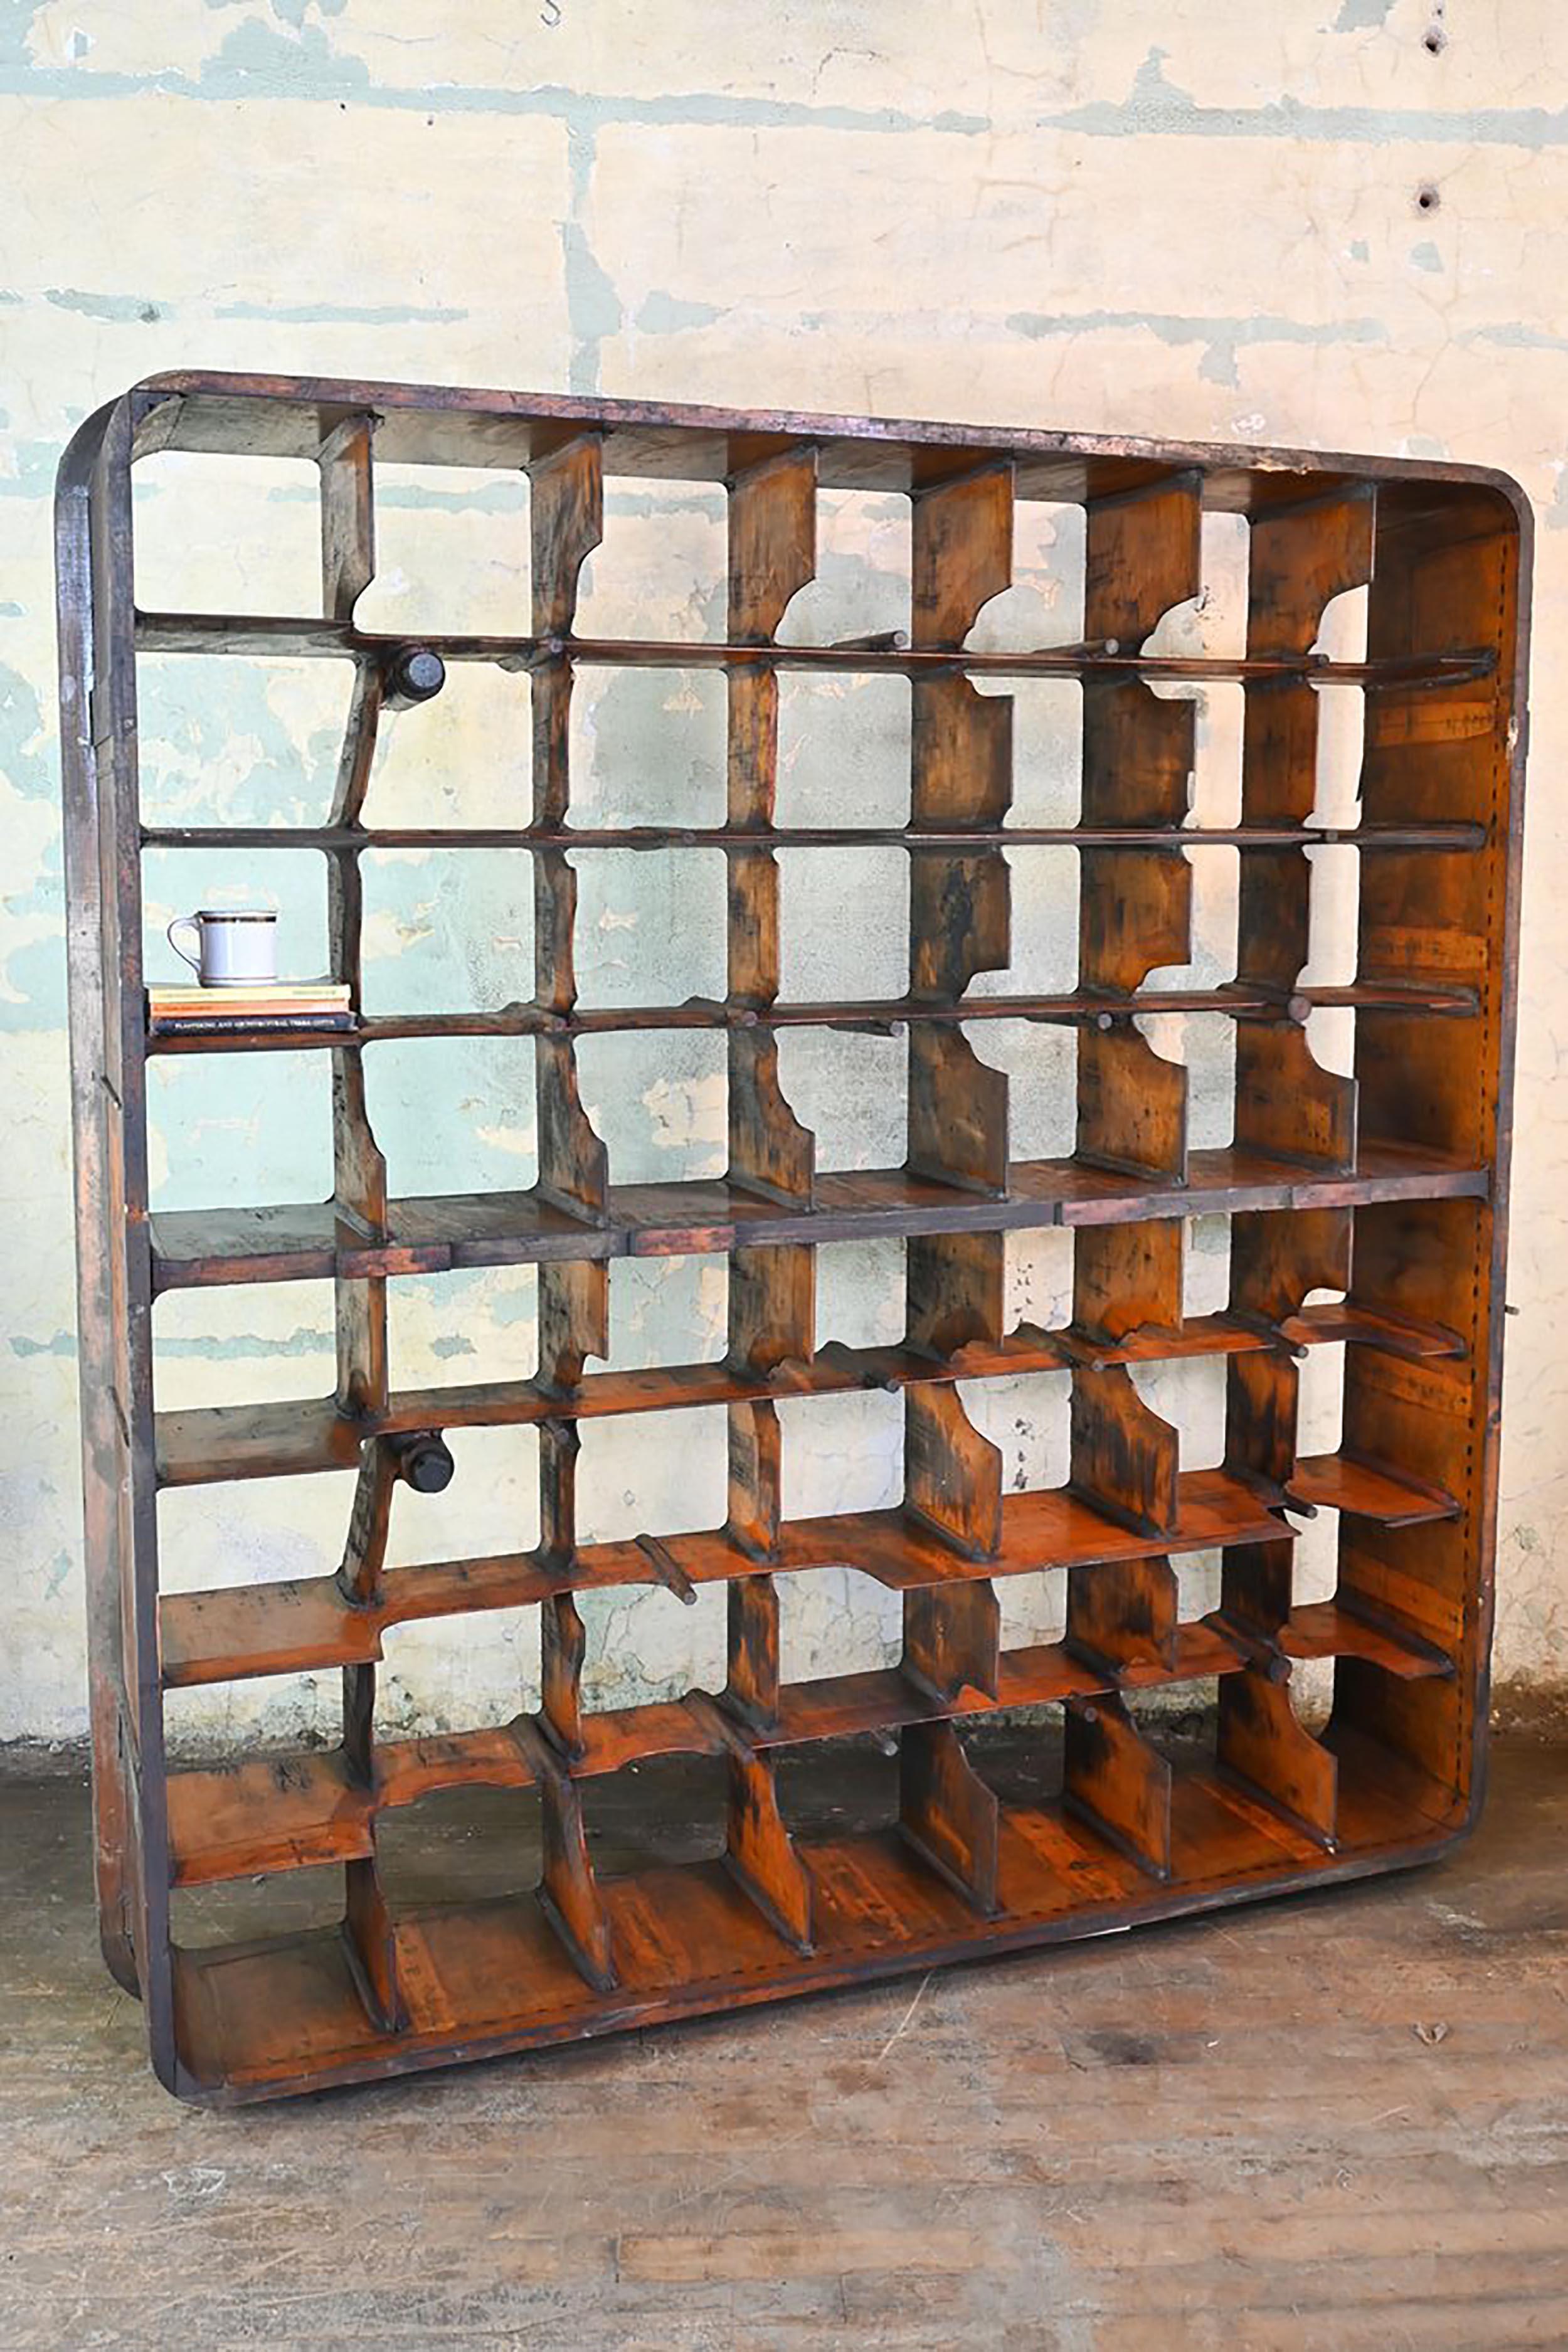 6 Available
AA# 60182
Circa: 1900
Condition: Age Consistent / good
Finish: Original
Origin: USA
Material: Wood
Overall dimensions: 59 1/2” wide x 66” height x 10” depth
Approximate opening dimensions: 8” wide x 7” height x 10” deep at widest